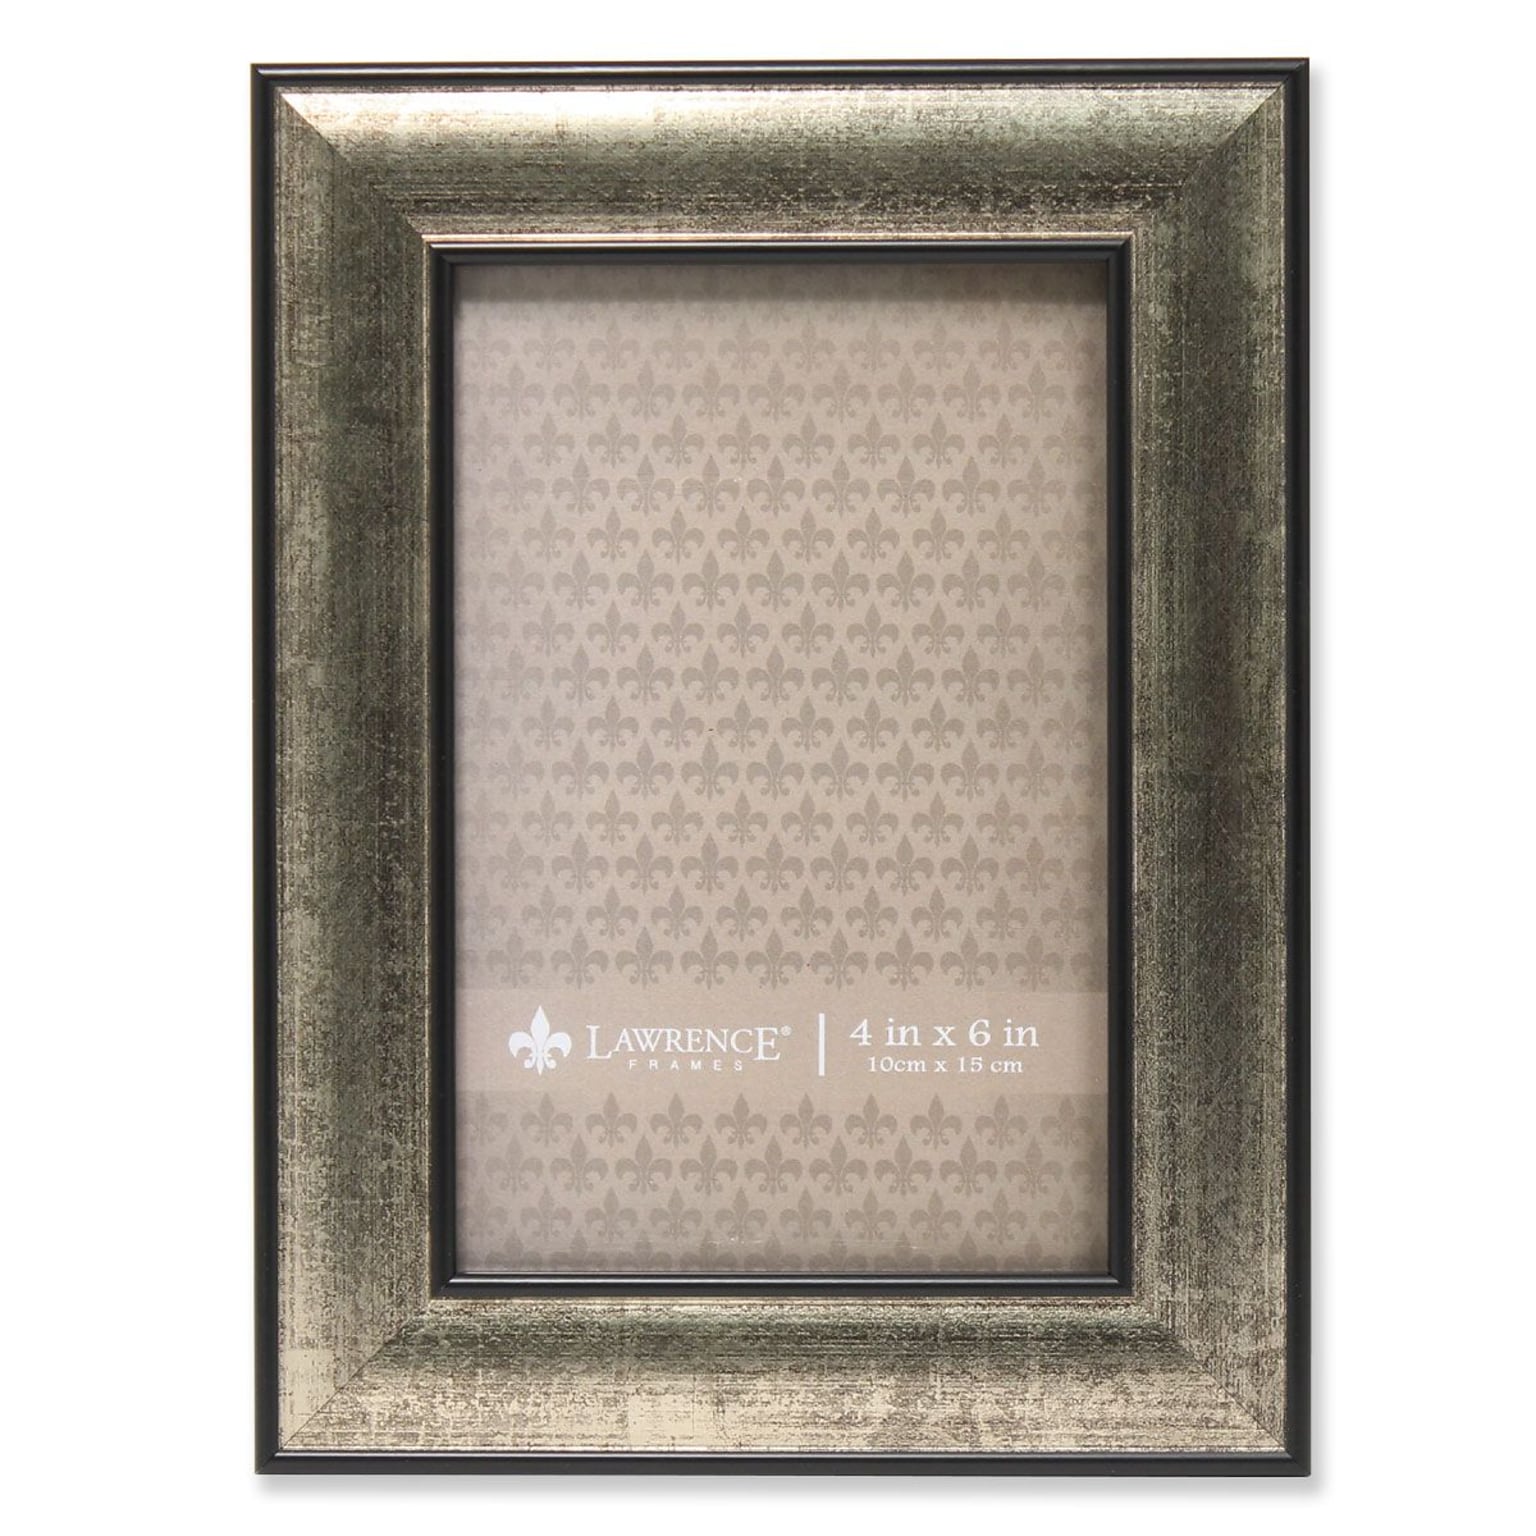 Lawrence Frames Lawrence Home 4 x 6 Polystyrene Gallery Picture Frame 536146